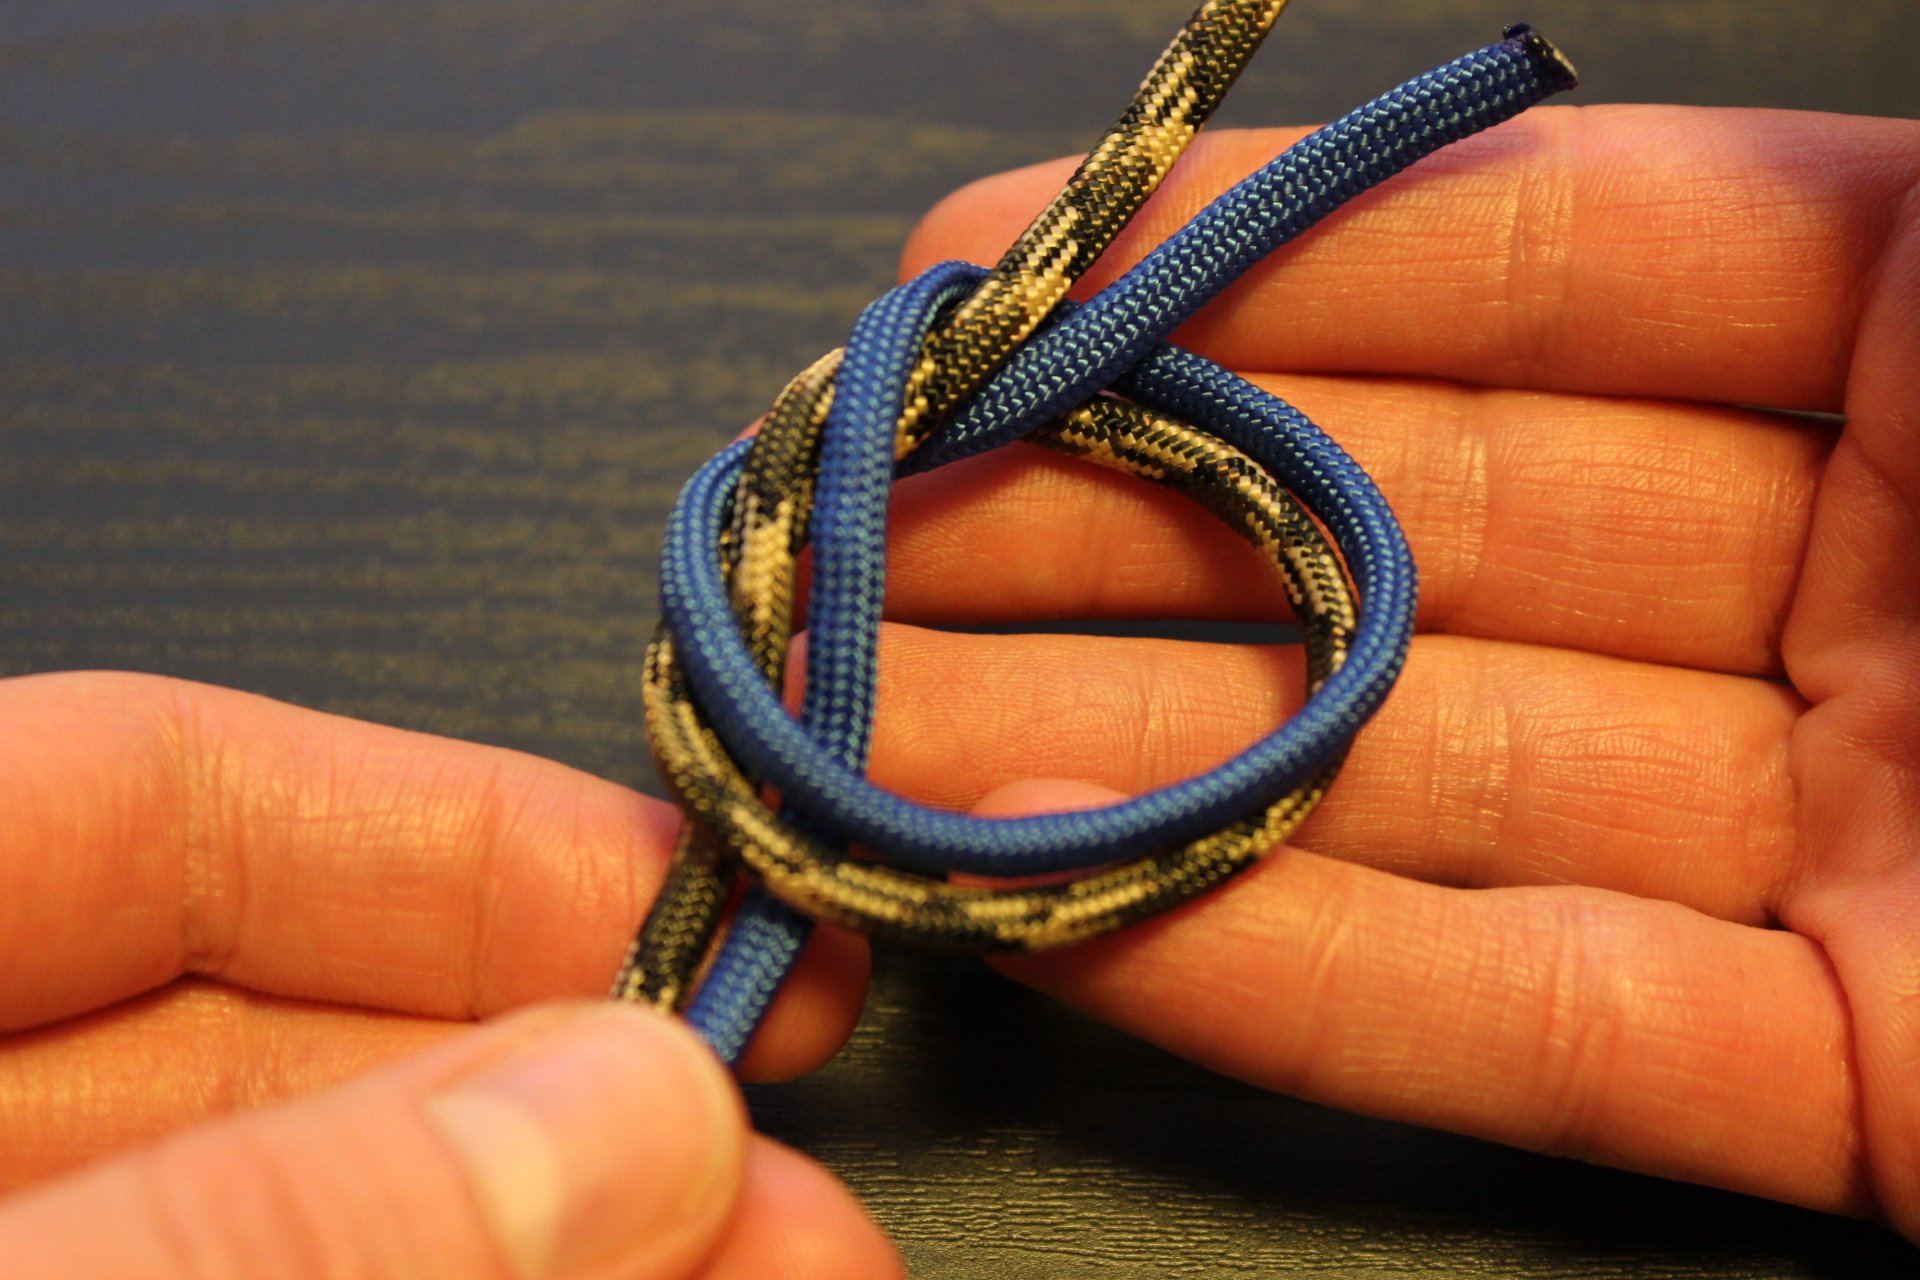 knot-craft-creating-a-lanyard-with-a-snake-knot